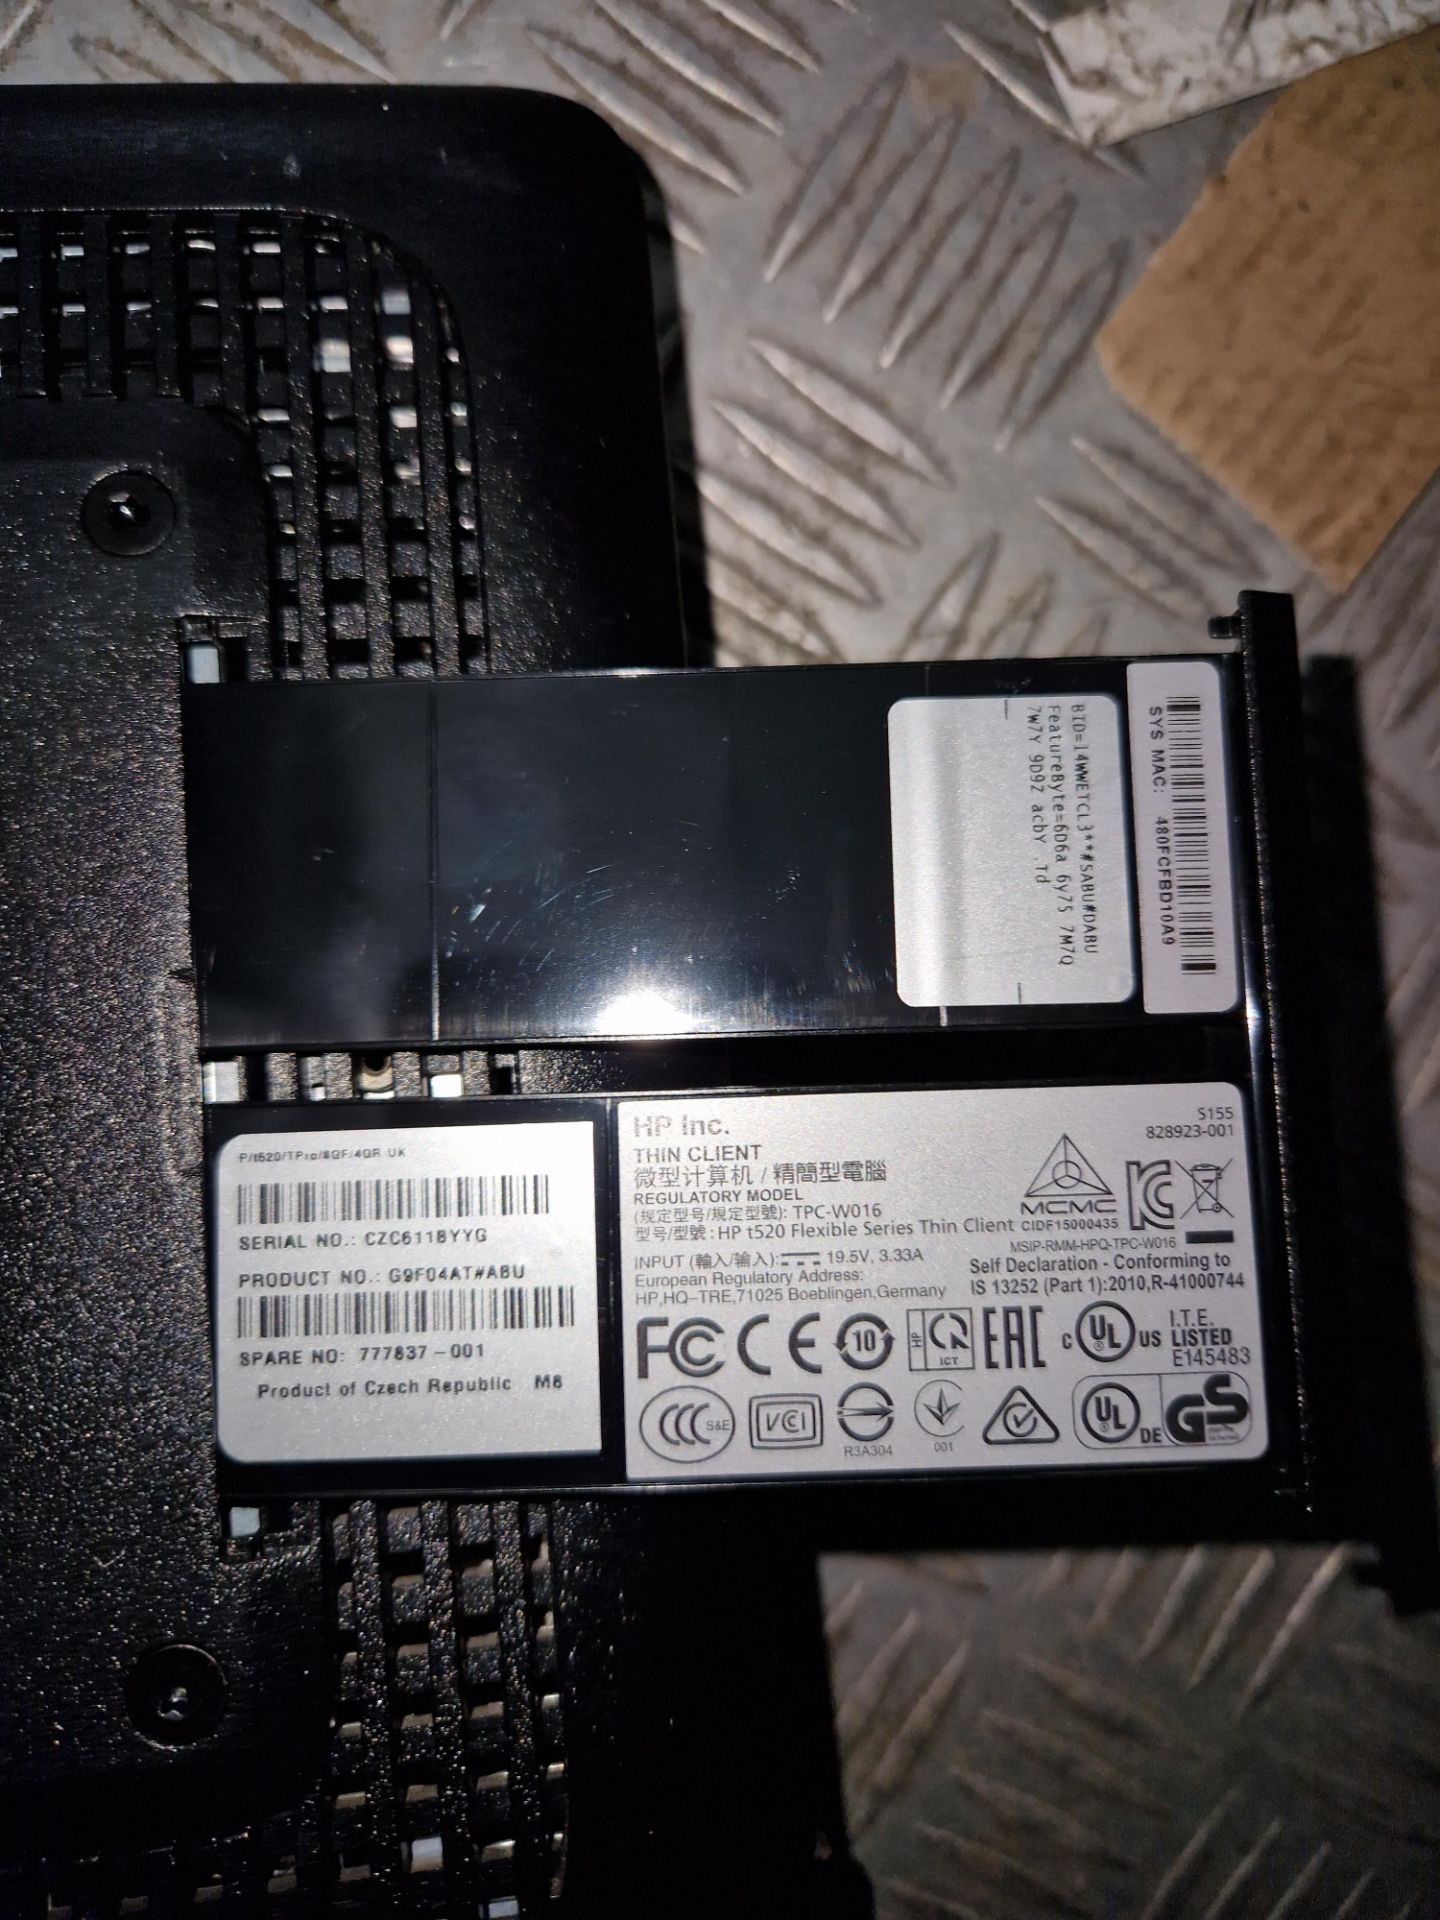 Four HP T520 Flexible Series TC Mini PCs (Hard Drives Removed) Please read the following important - Image 4 of 4